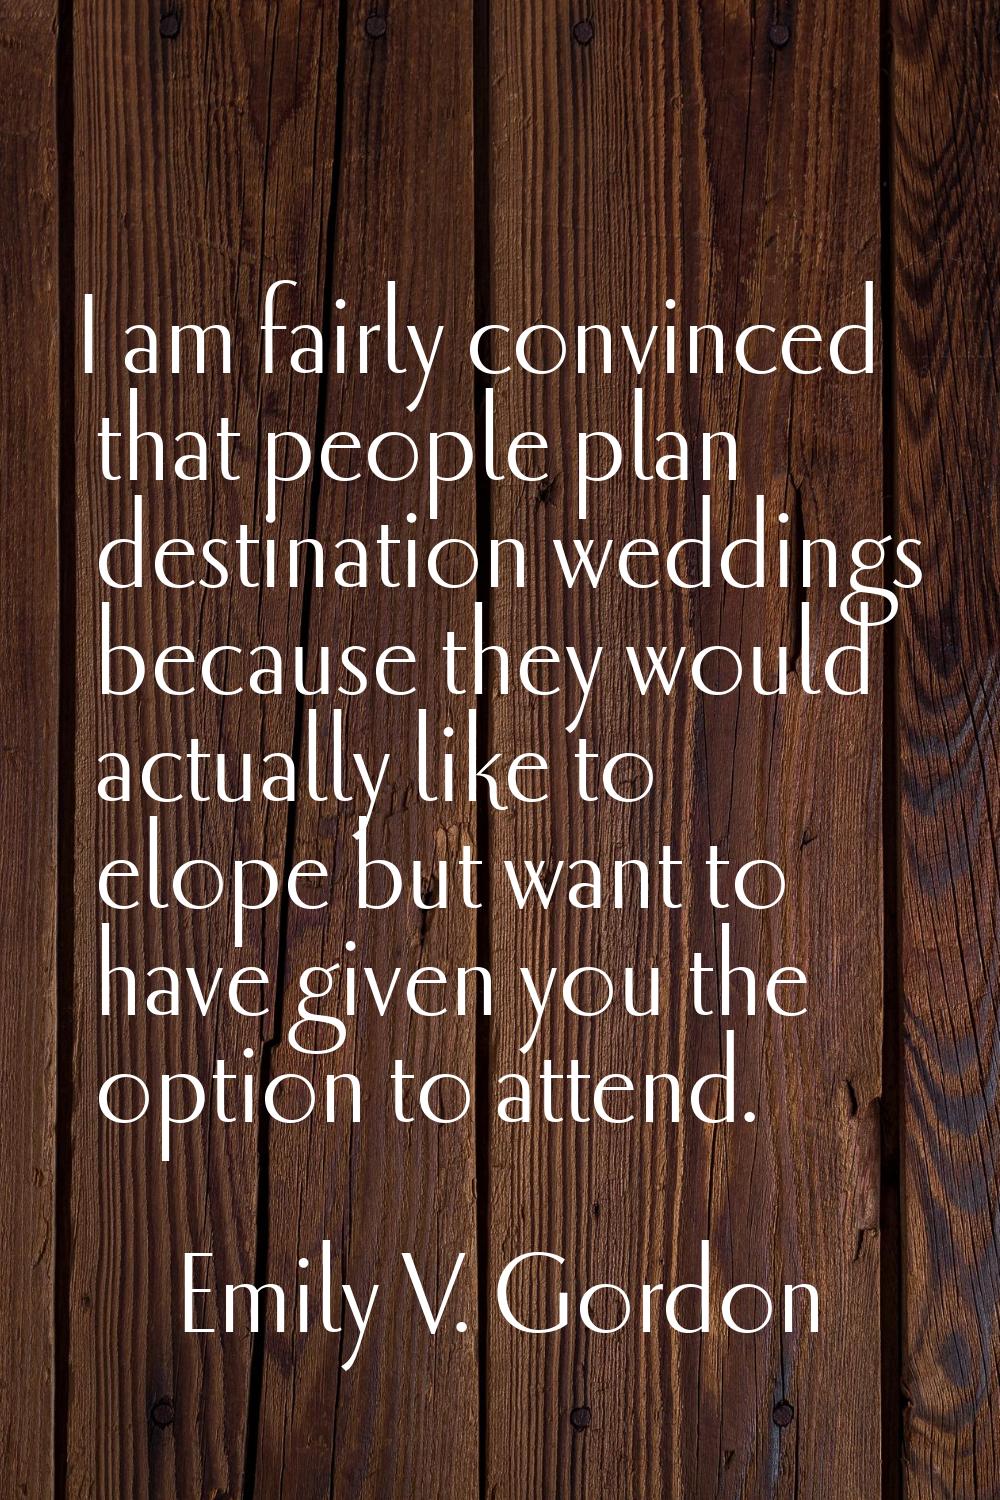 I am fairly convinced that people plan destination weddings because they would actually like to elo